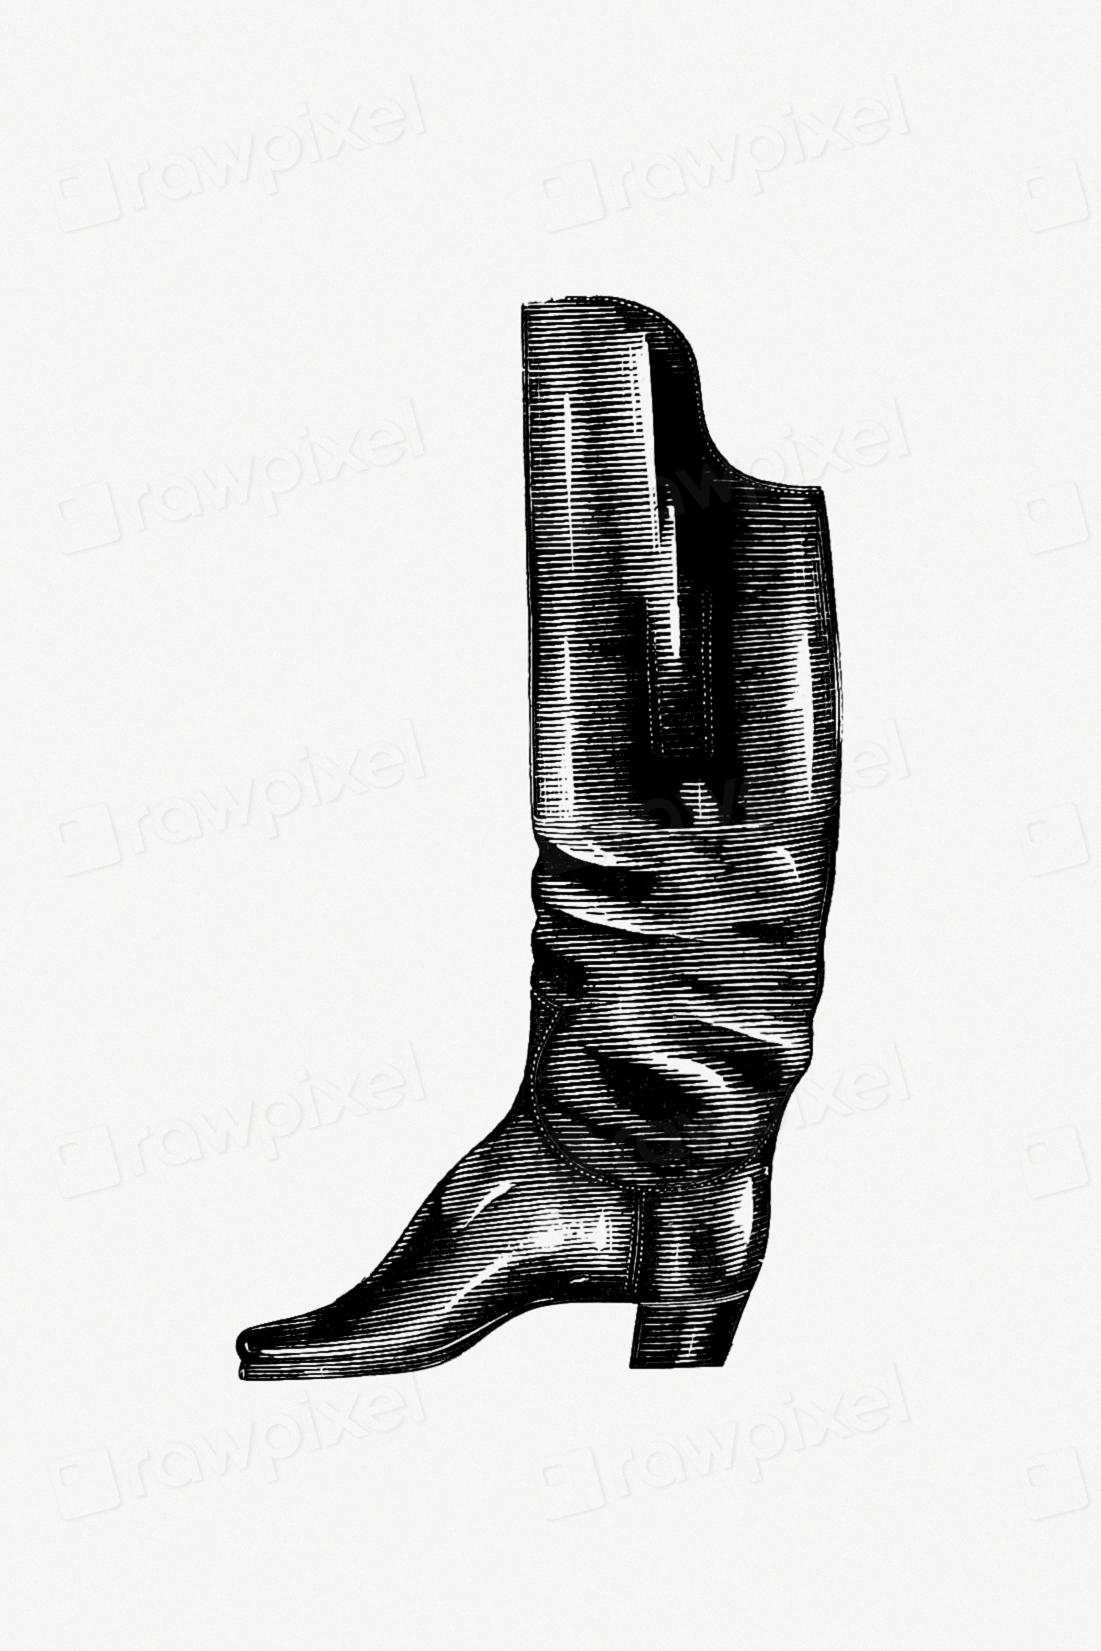 Shooting boot published by Henry | Free Photo Illustration - rawpixel